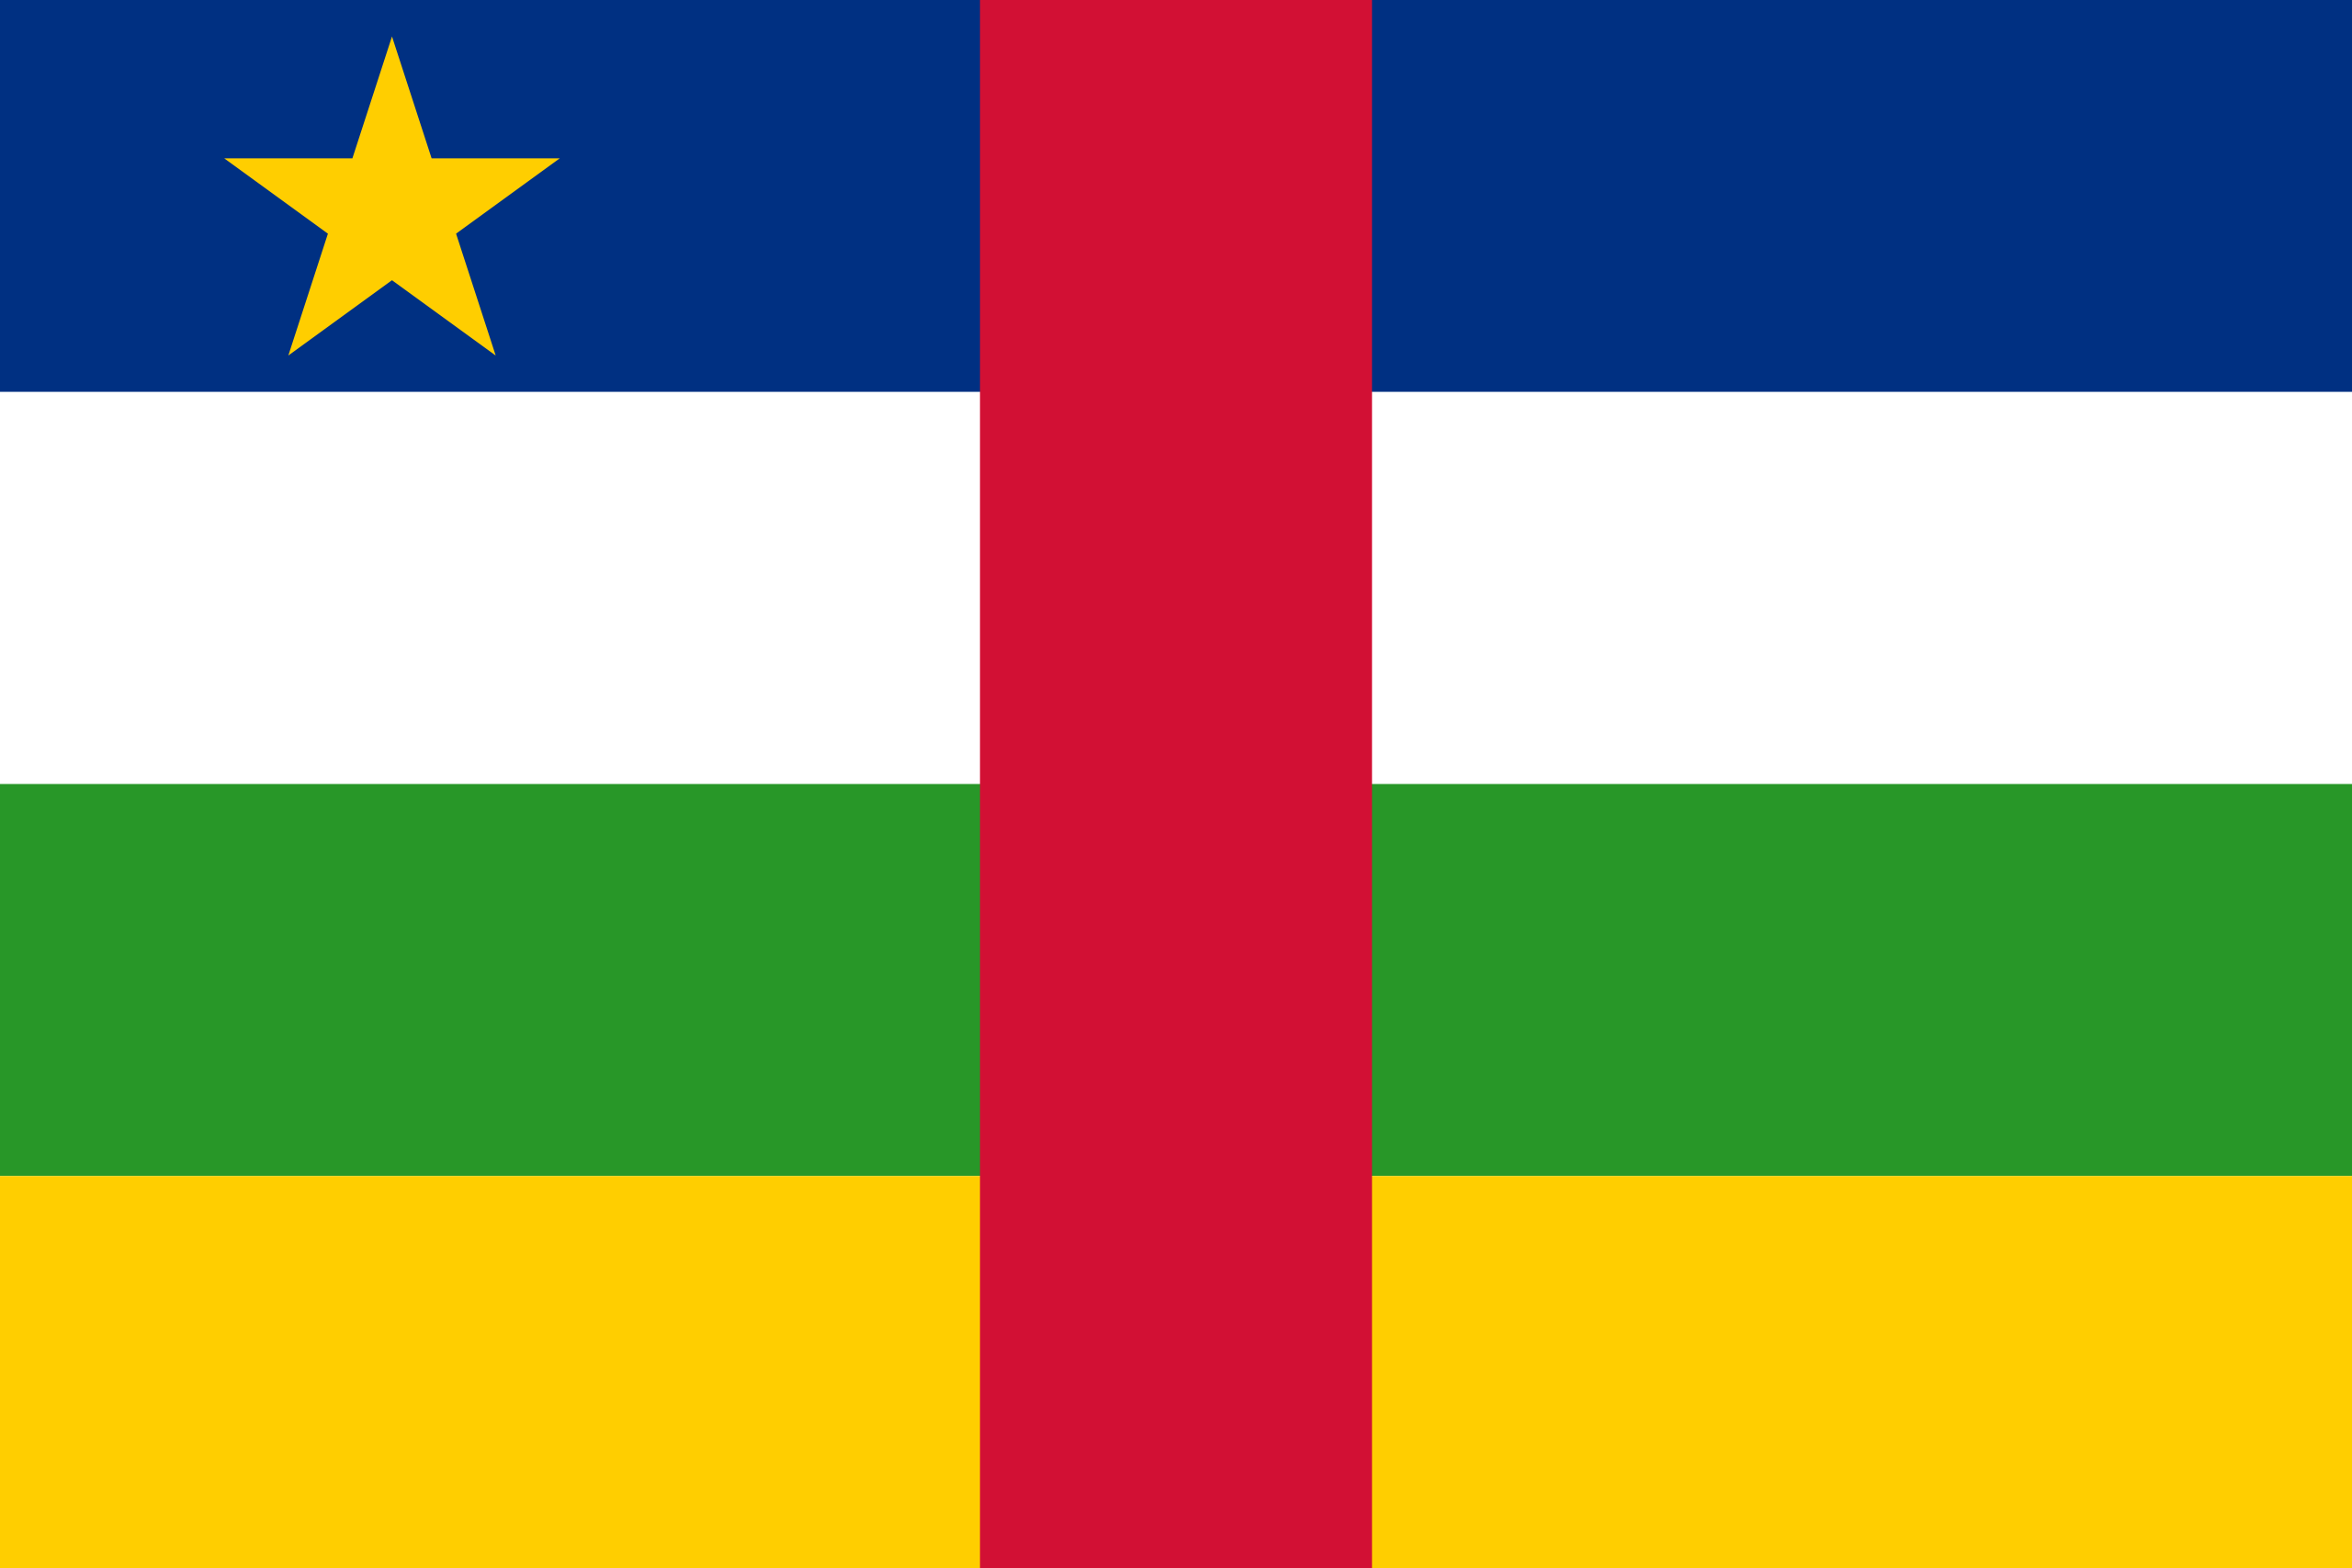 Central African Republic's flag